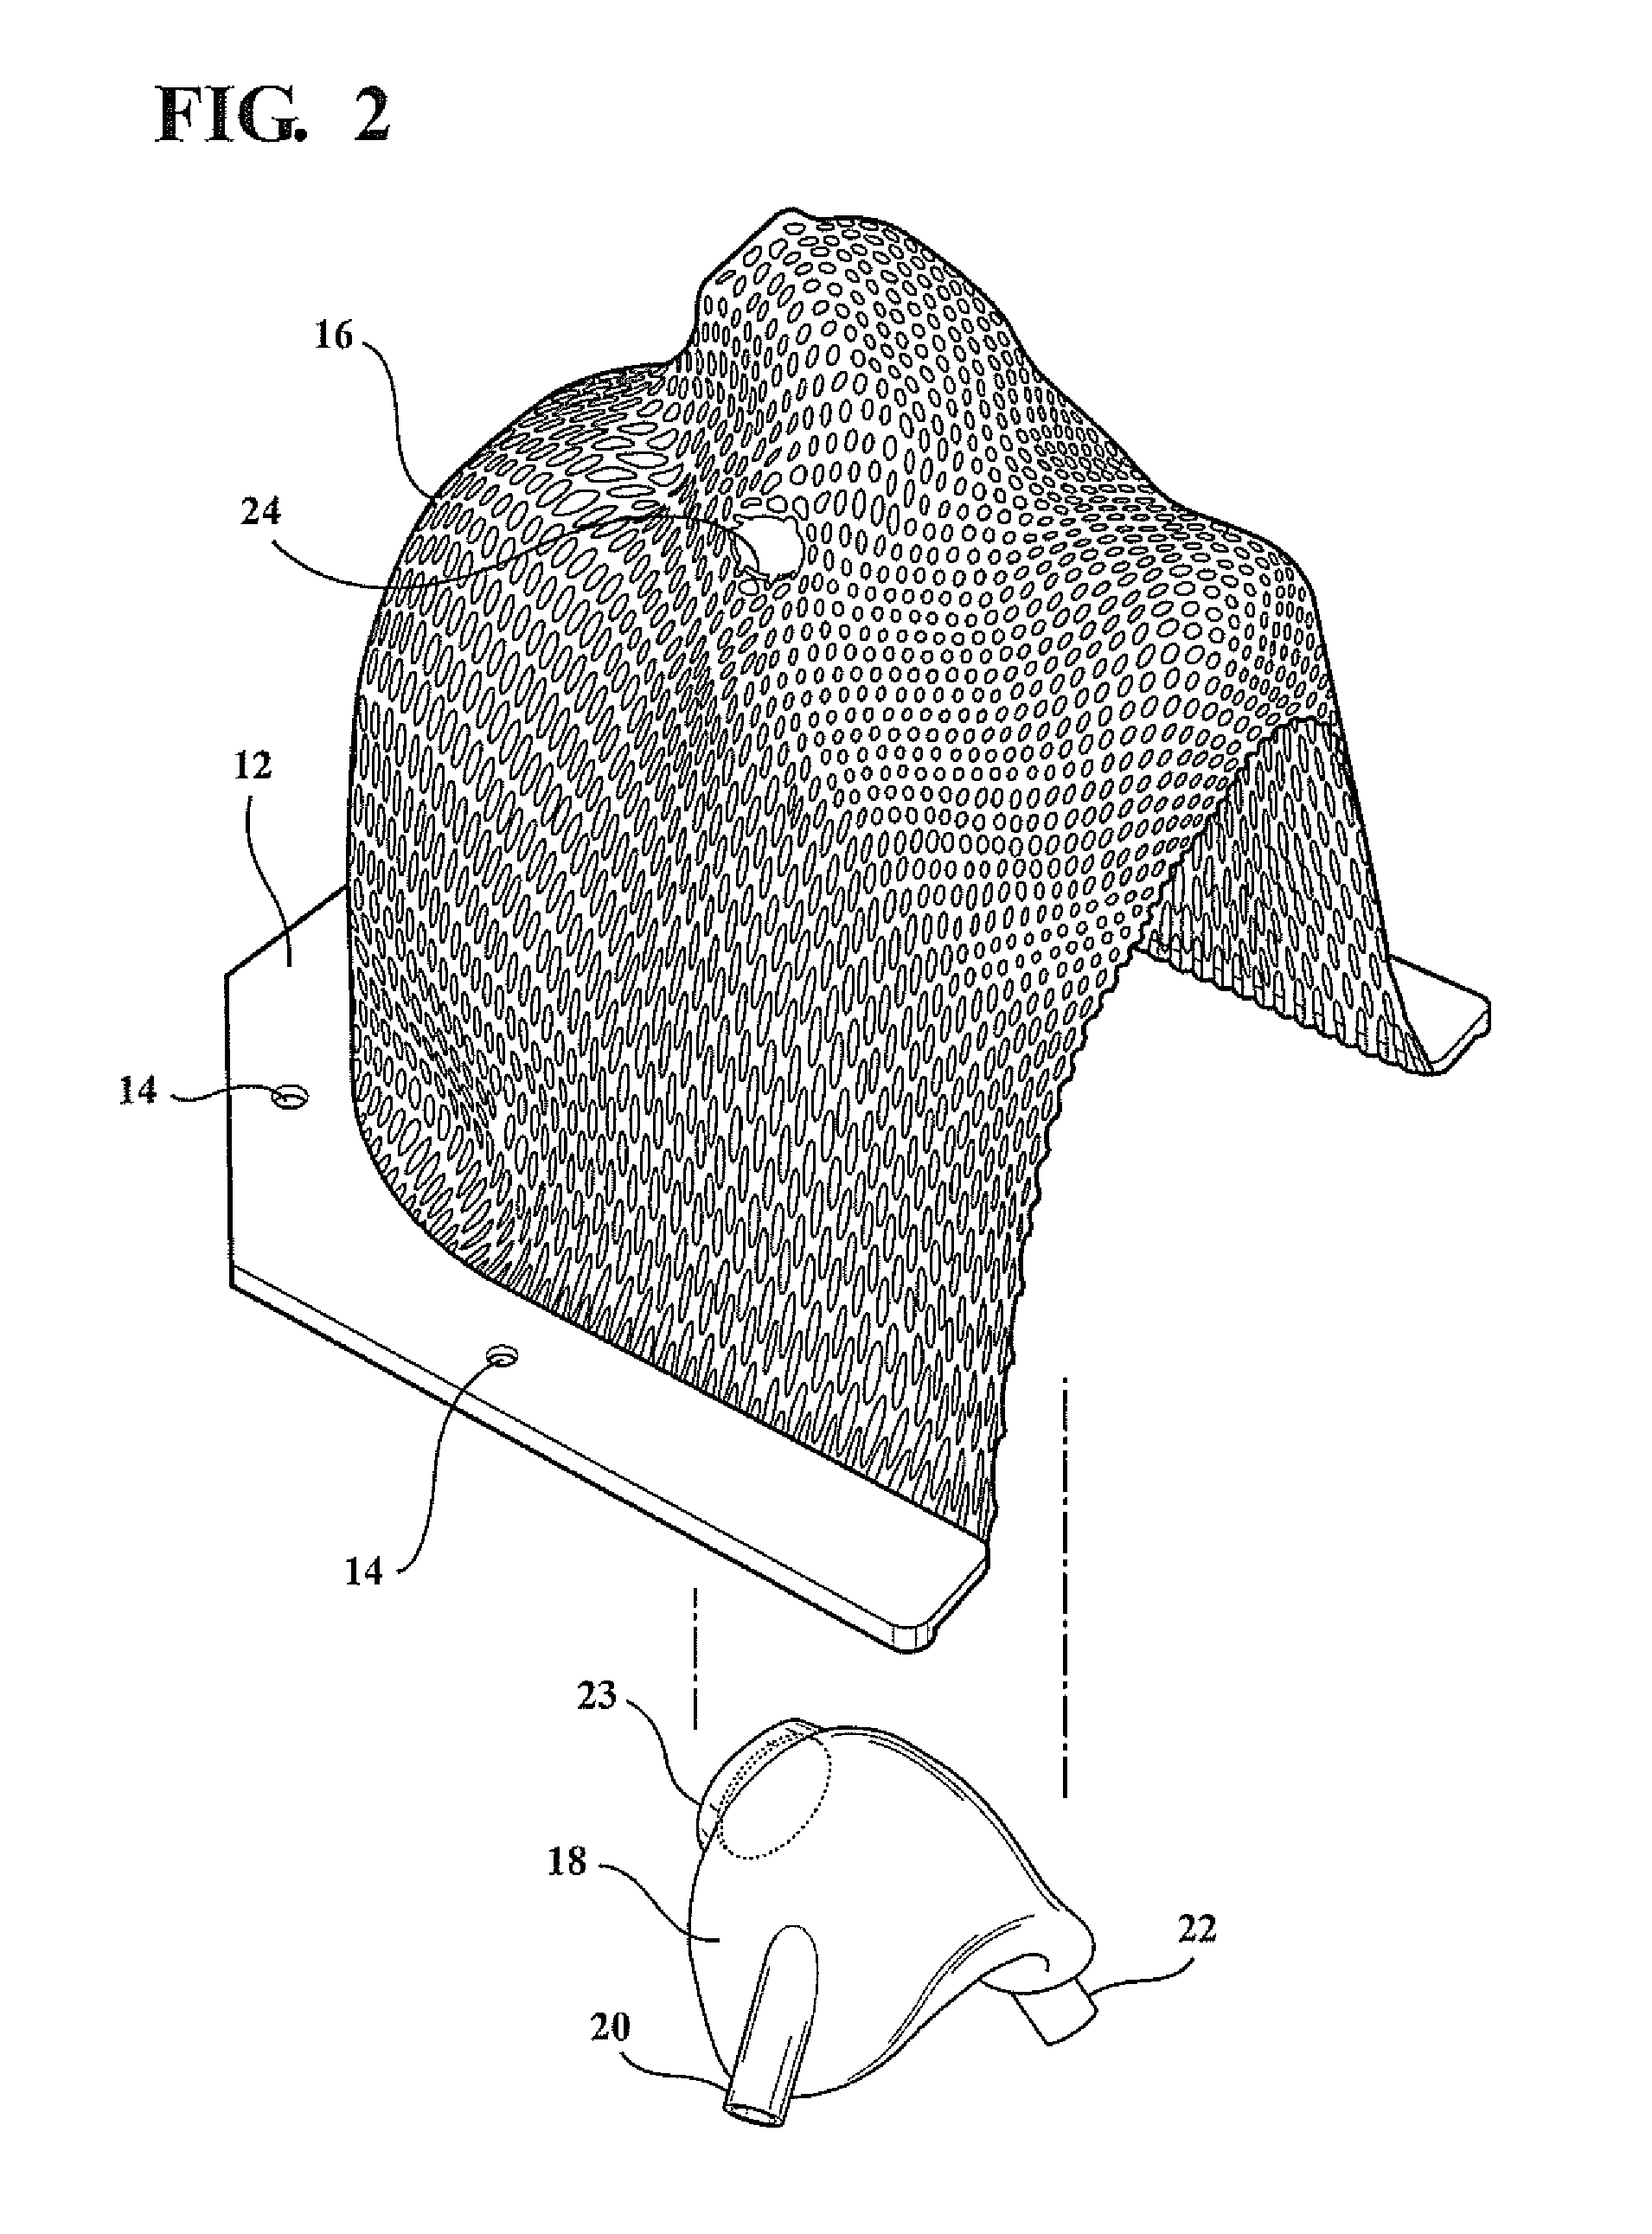 Head immobilization device with inhaler, method for making same and method of using same